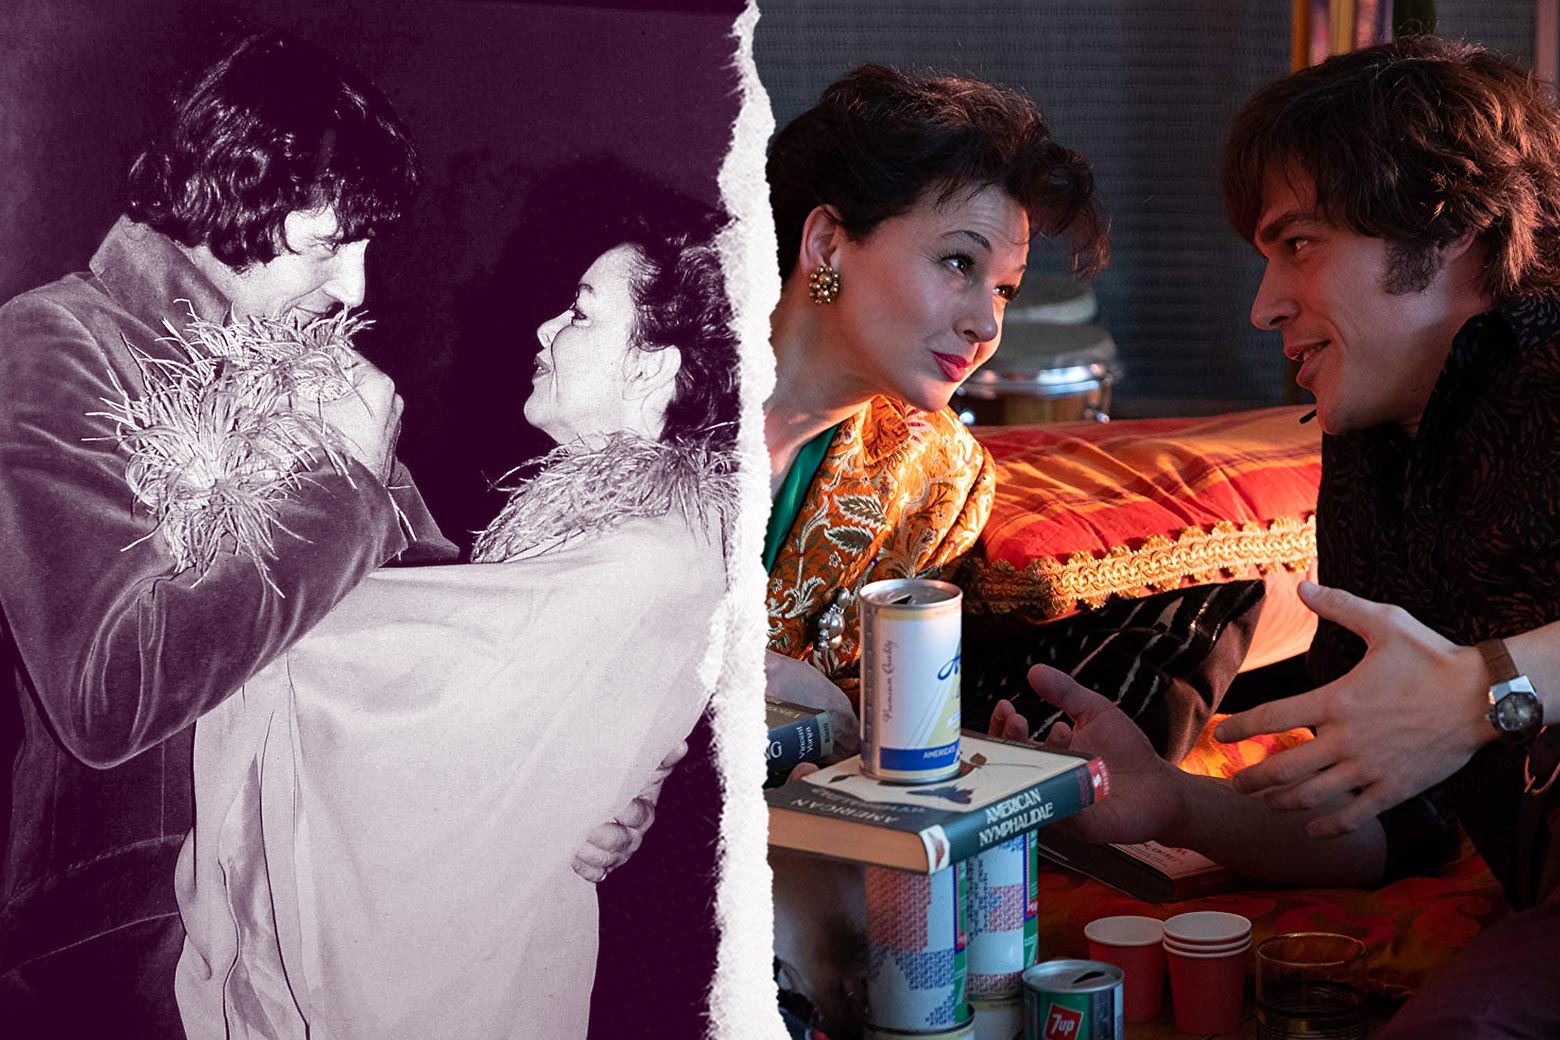 Side-by-side of Mickey Deans and Judy Garland, and Renée Zellweger as Judy Garland with Finn Wittrock as Mickey Deans in the movie Judy.